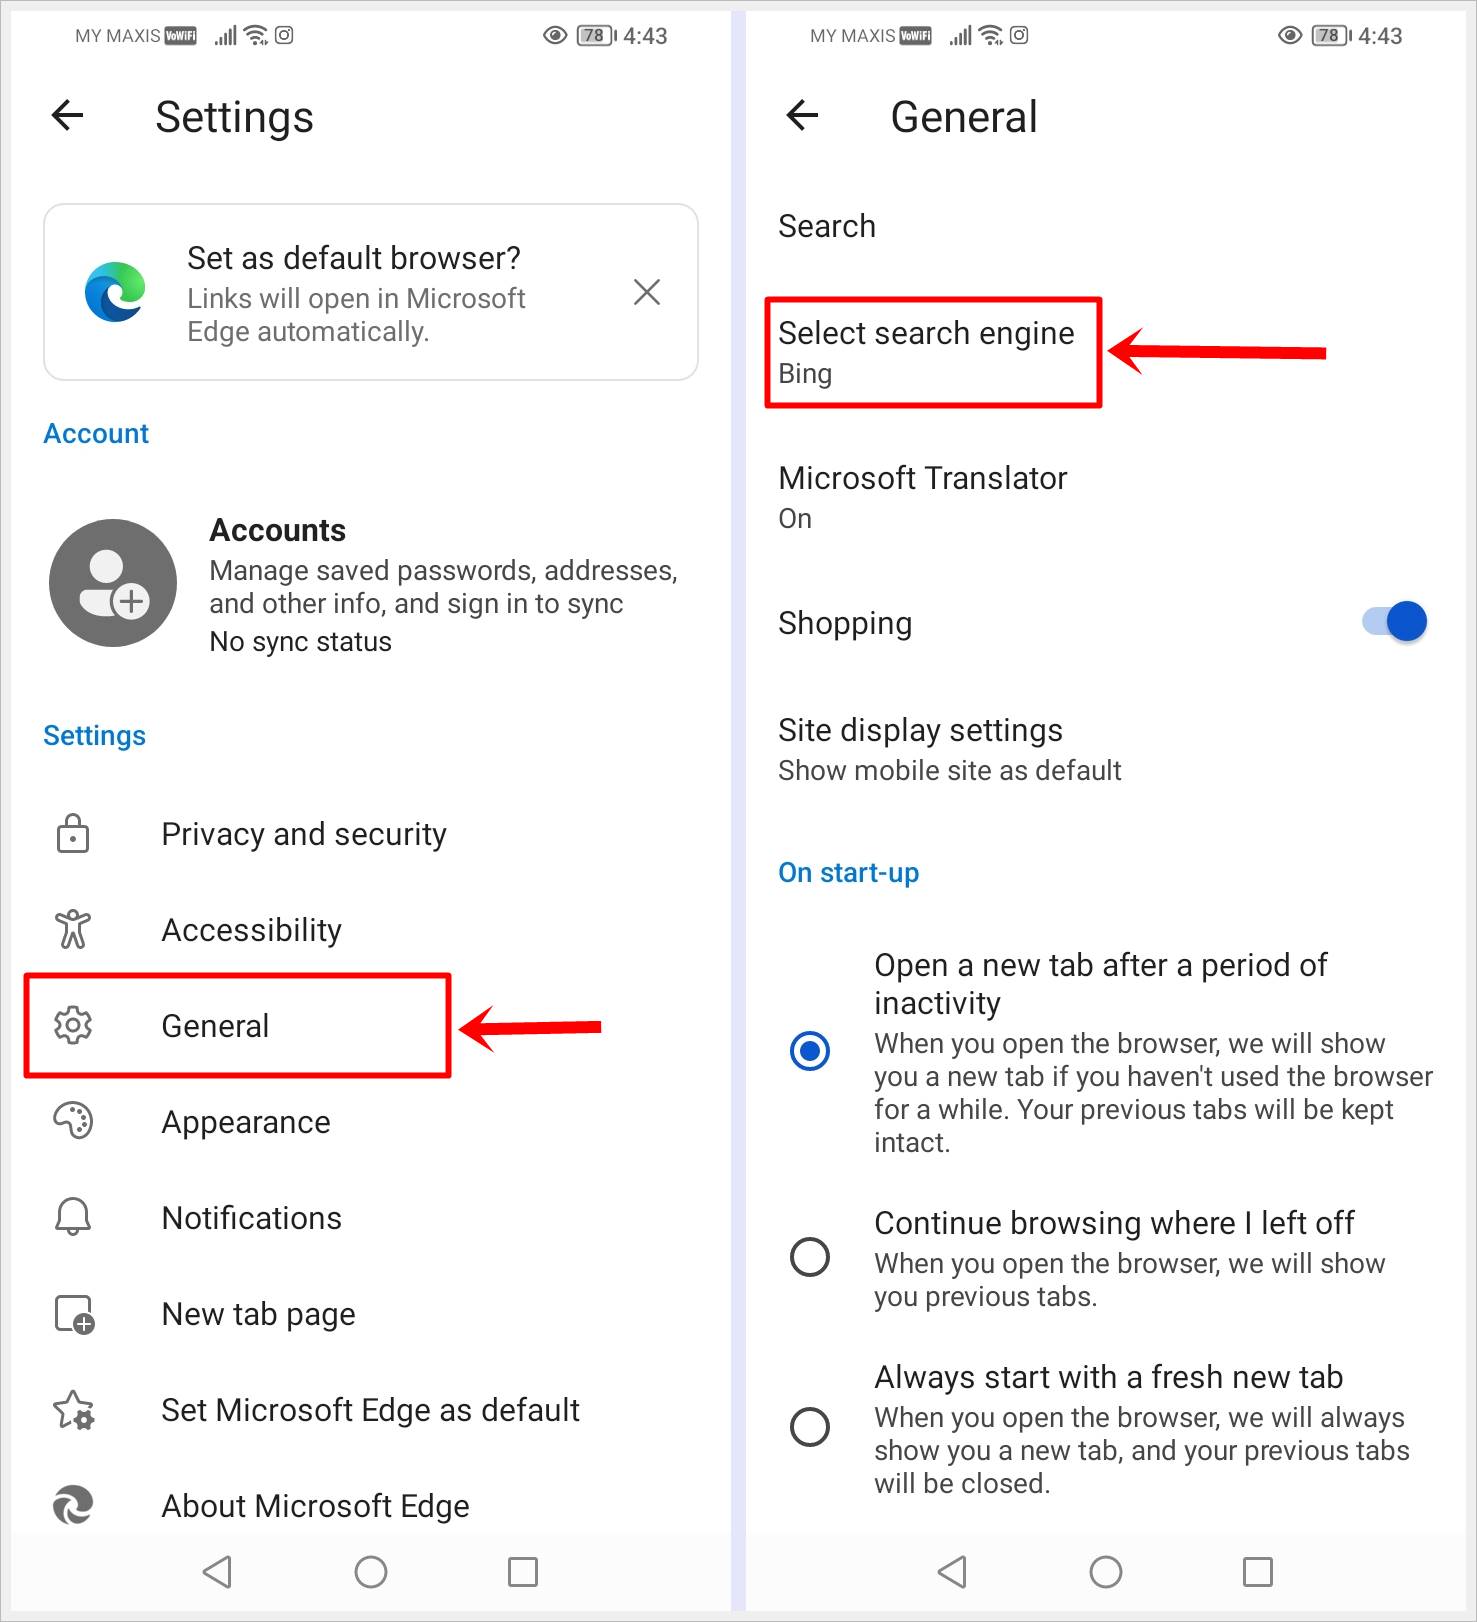 This image shows 2 screenshots of the Microsoft Edge app for Android. The "General" and "Select search engine" options are highlighted on each screenshot, respectively.